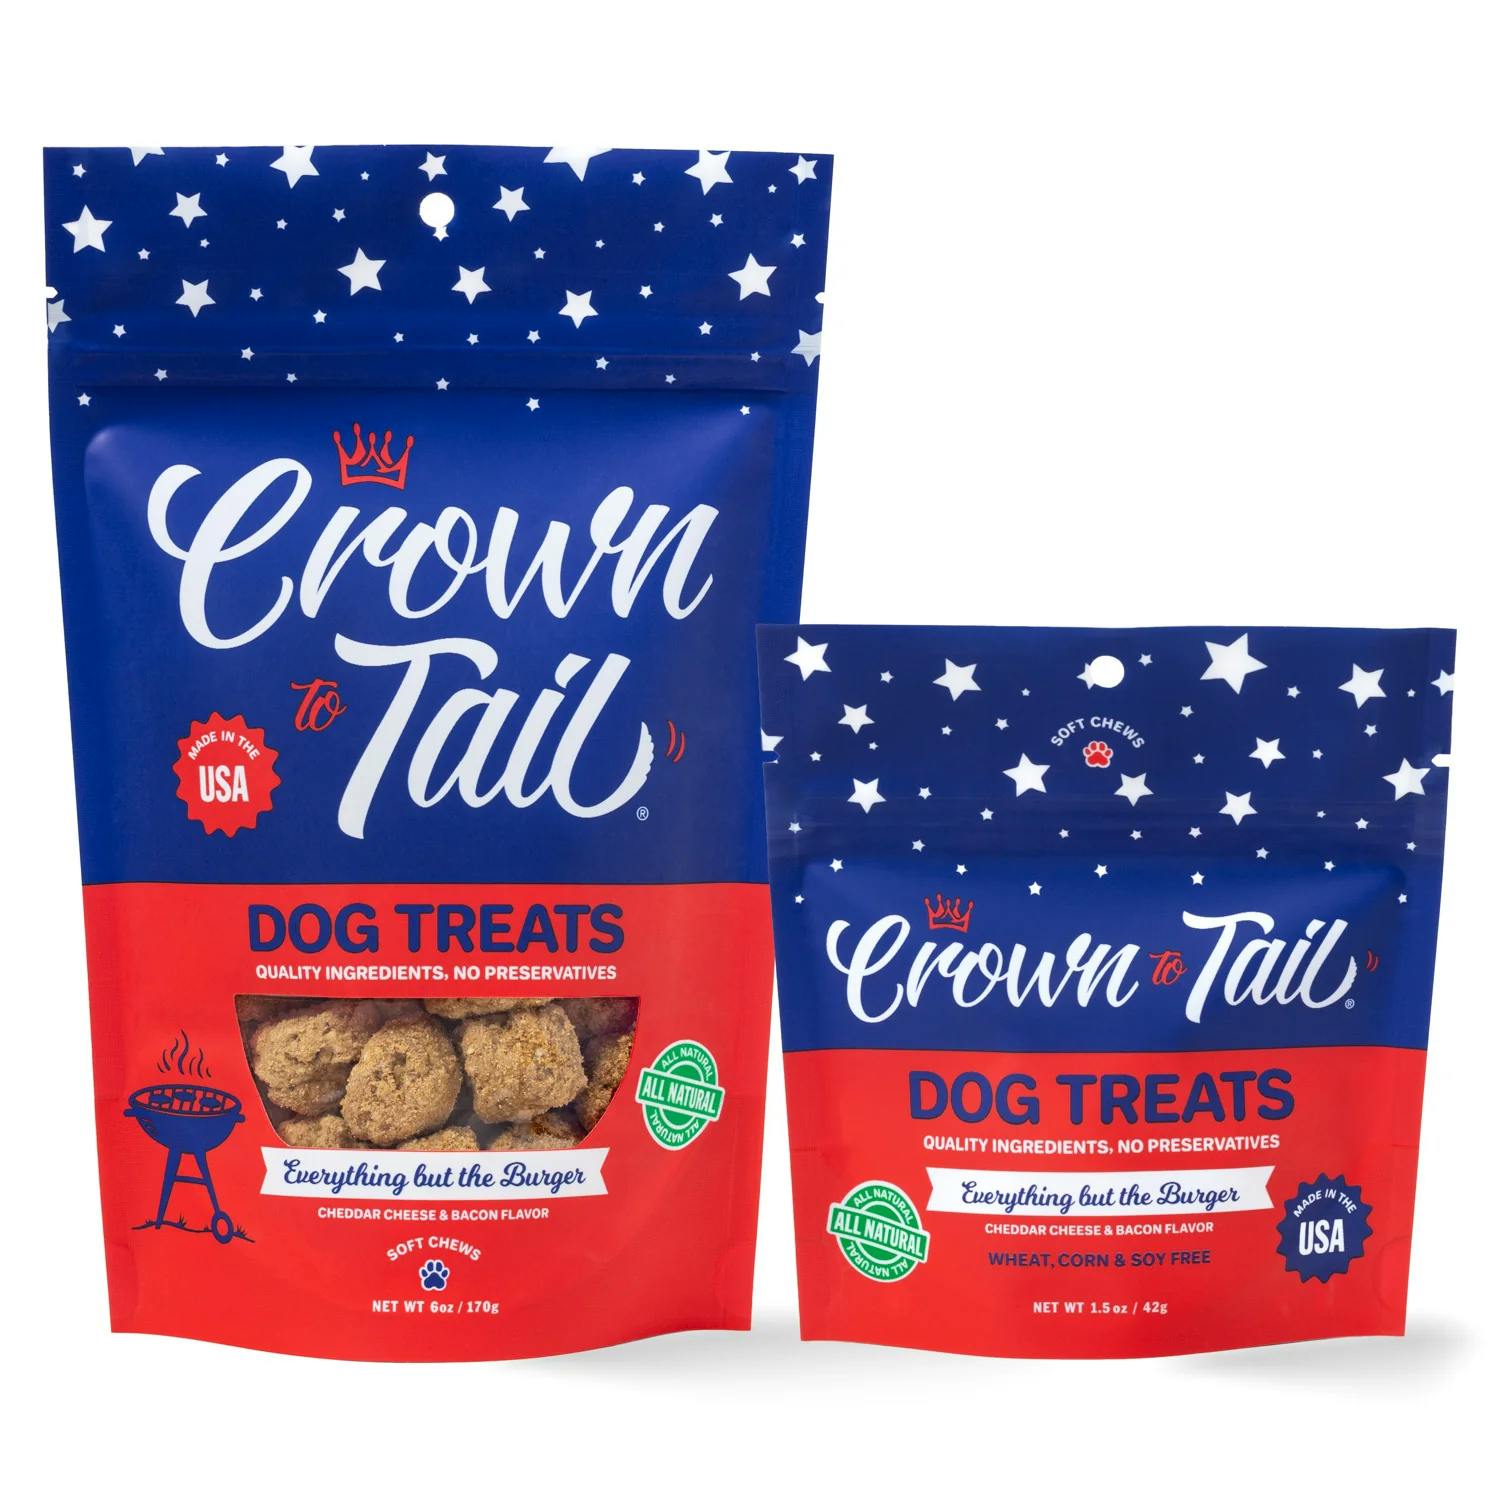 CROWN TO TAIL EVERYTHING BUT THE BURGER SOFT CHEW DOG TREATS - Image 0